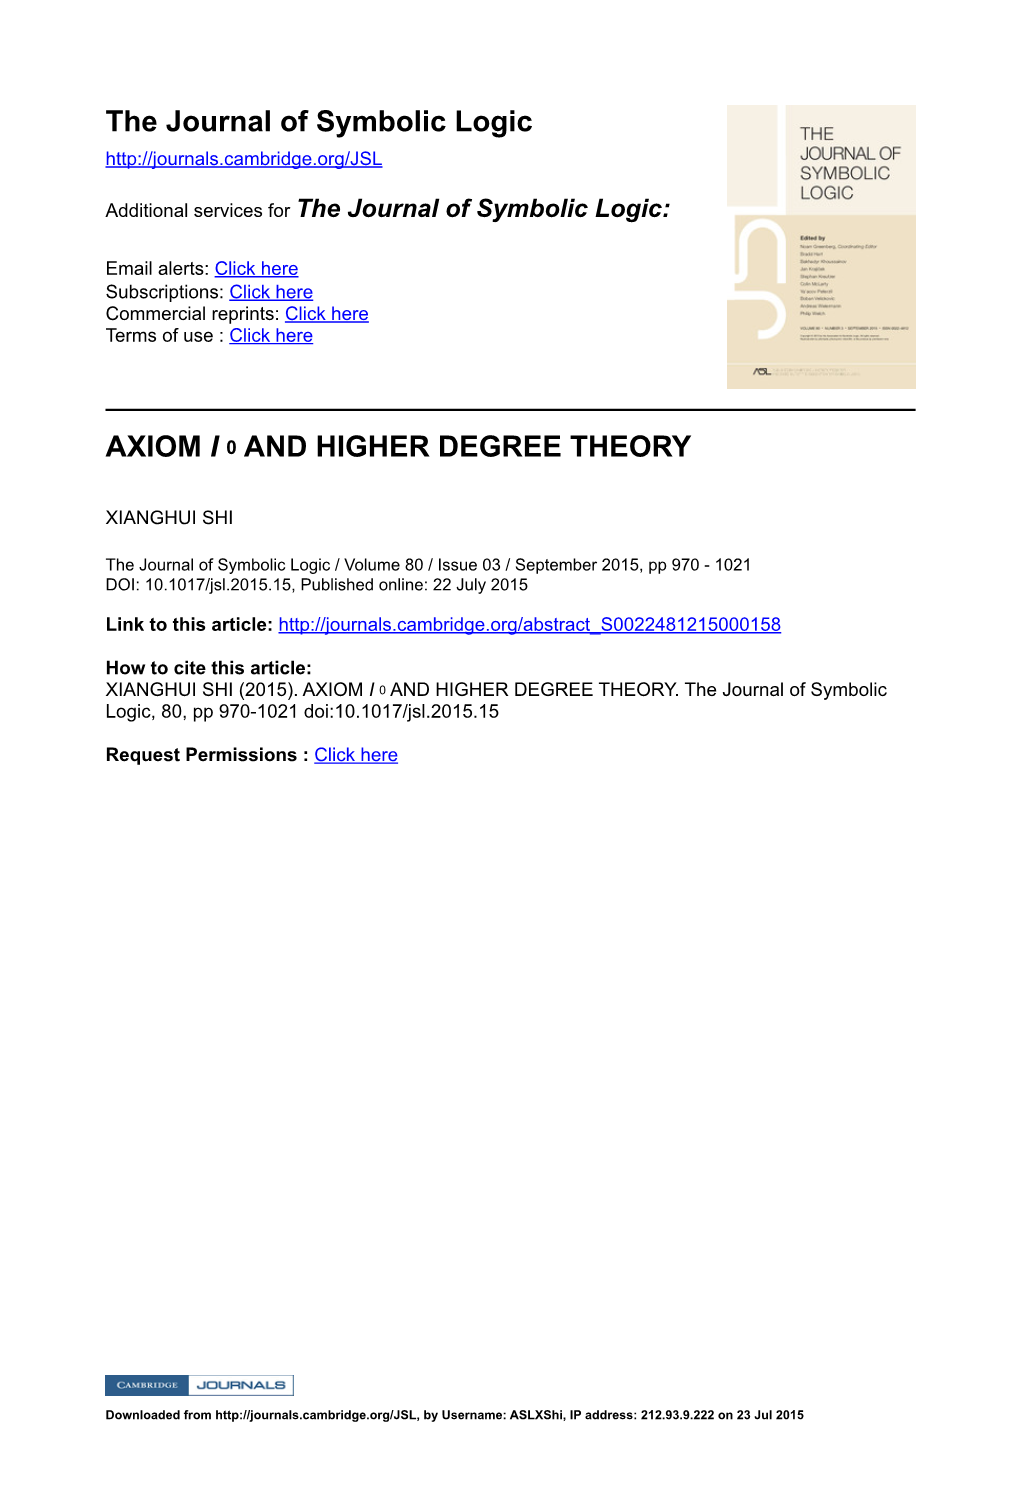 The Journal of Symbolic Logic AXIOM I 0 and HIGHER DEGREE